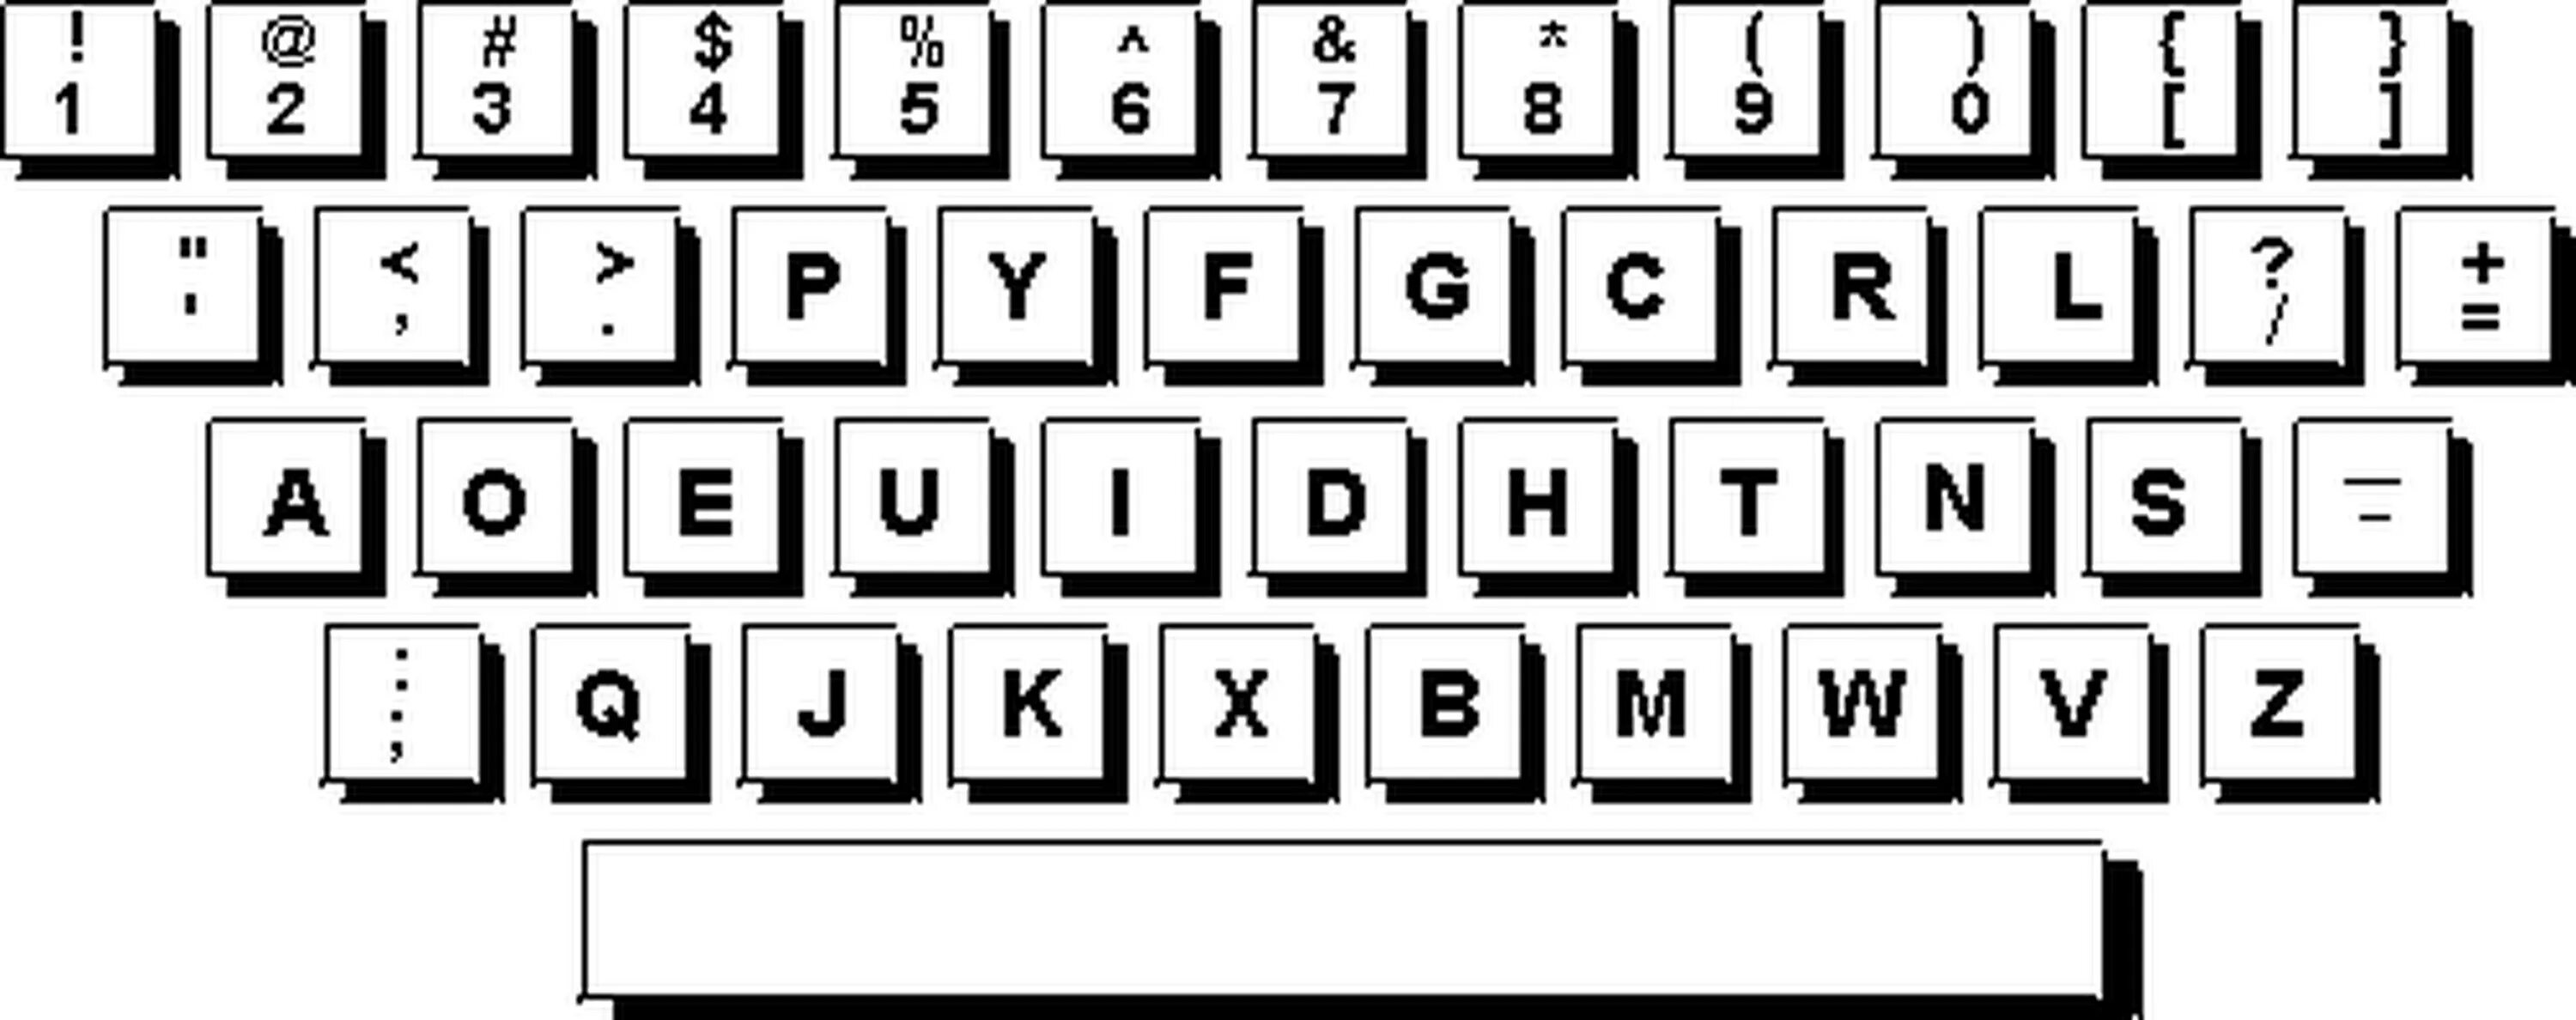 Coloring page with colorful keyboard layout